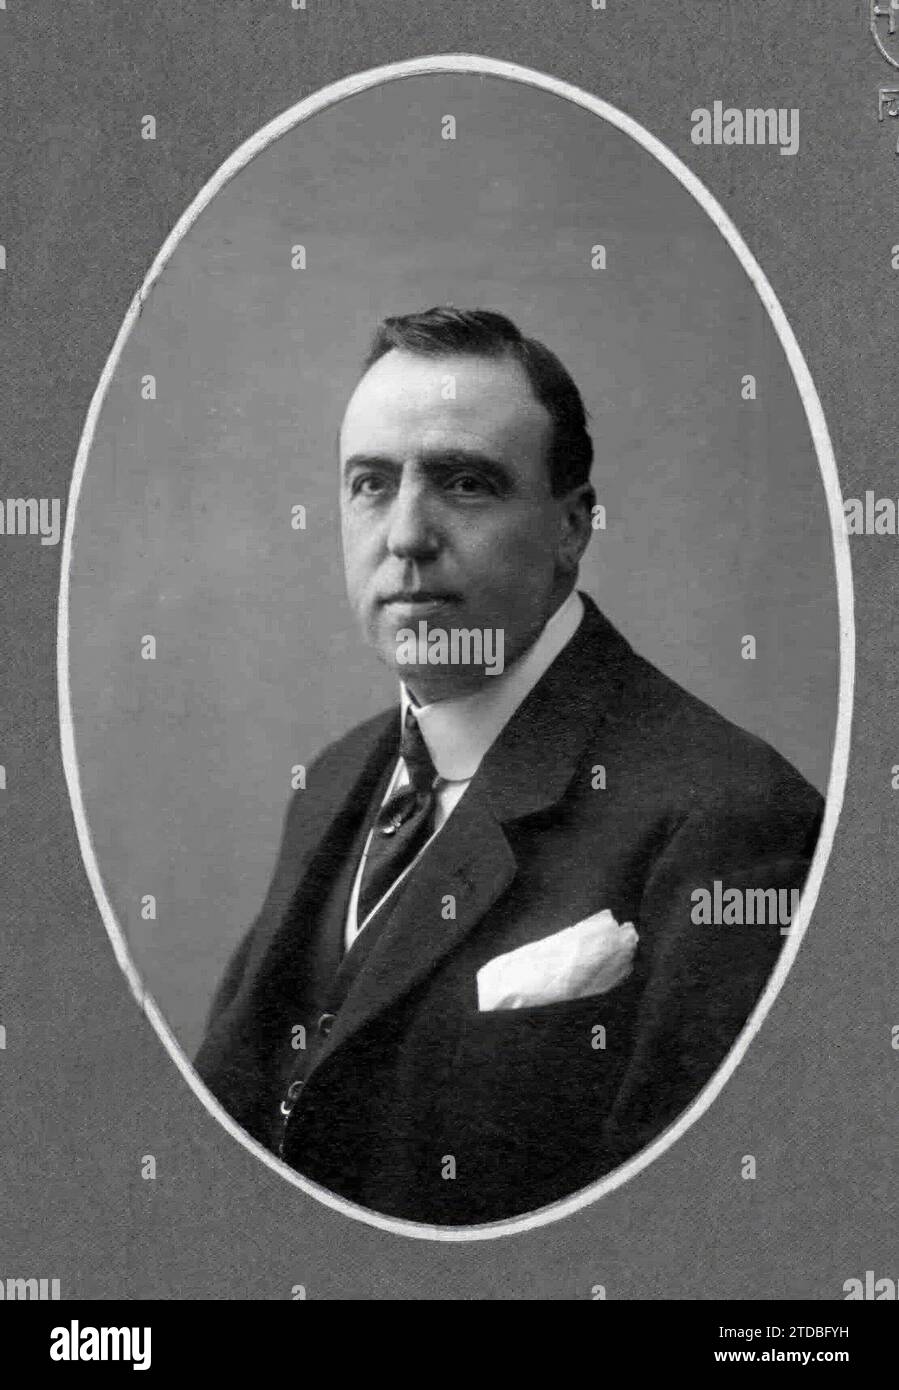 02/28/1918. Don Antonio Turón, new dean of the notary school of Madrid - Approximate date. Credit: Album / Archivo ABC / Alfonso Sánchez García Alfonso Stock Photo